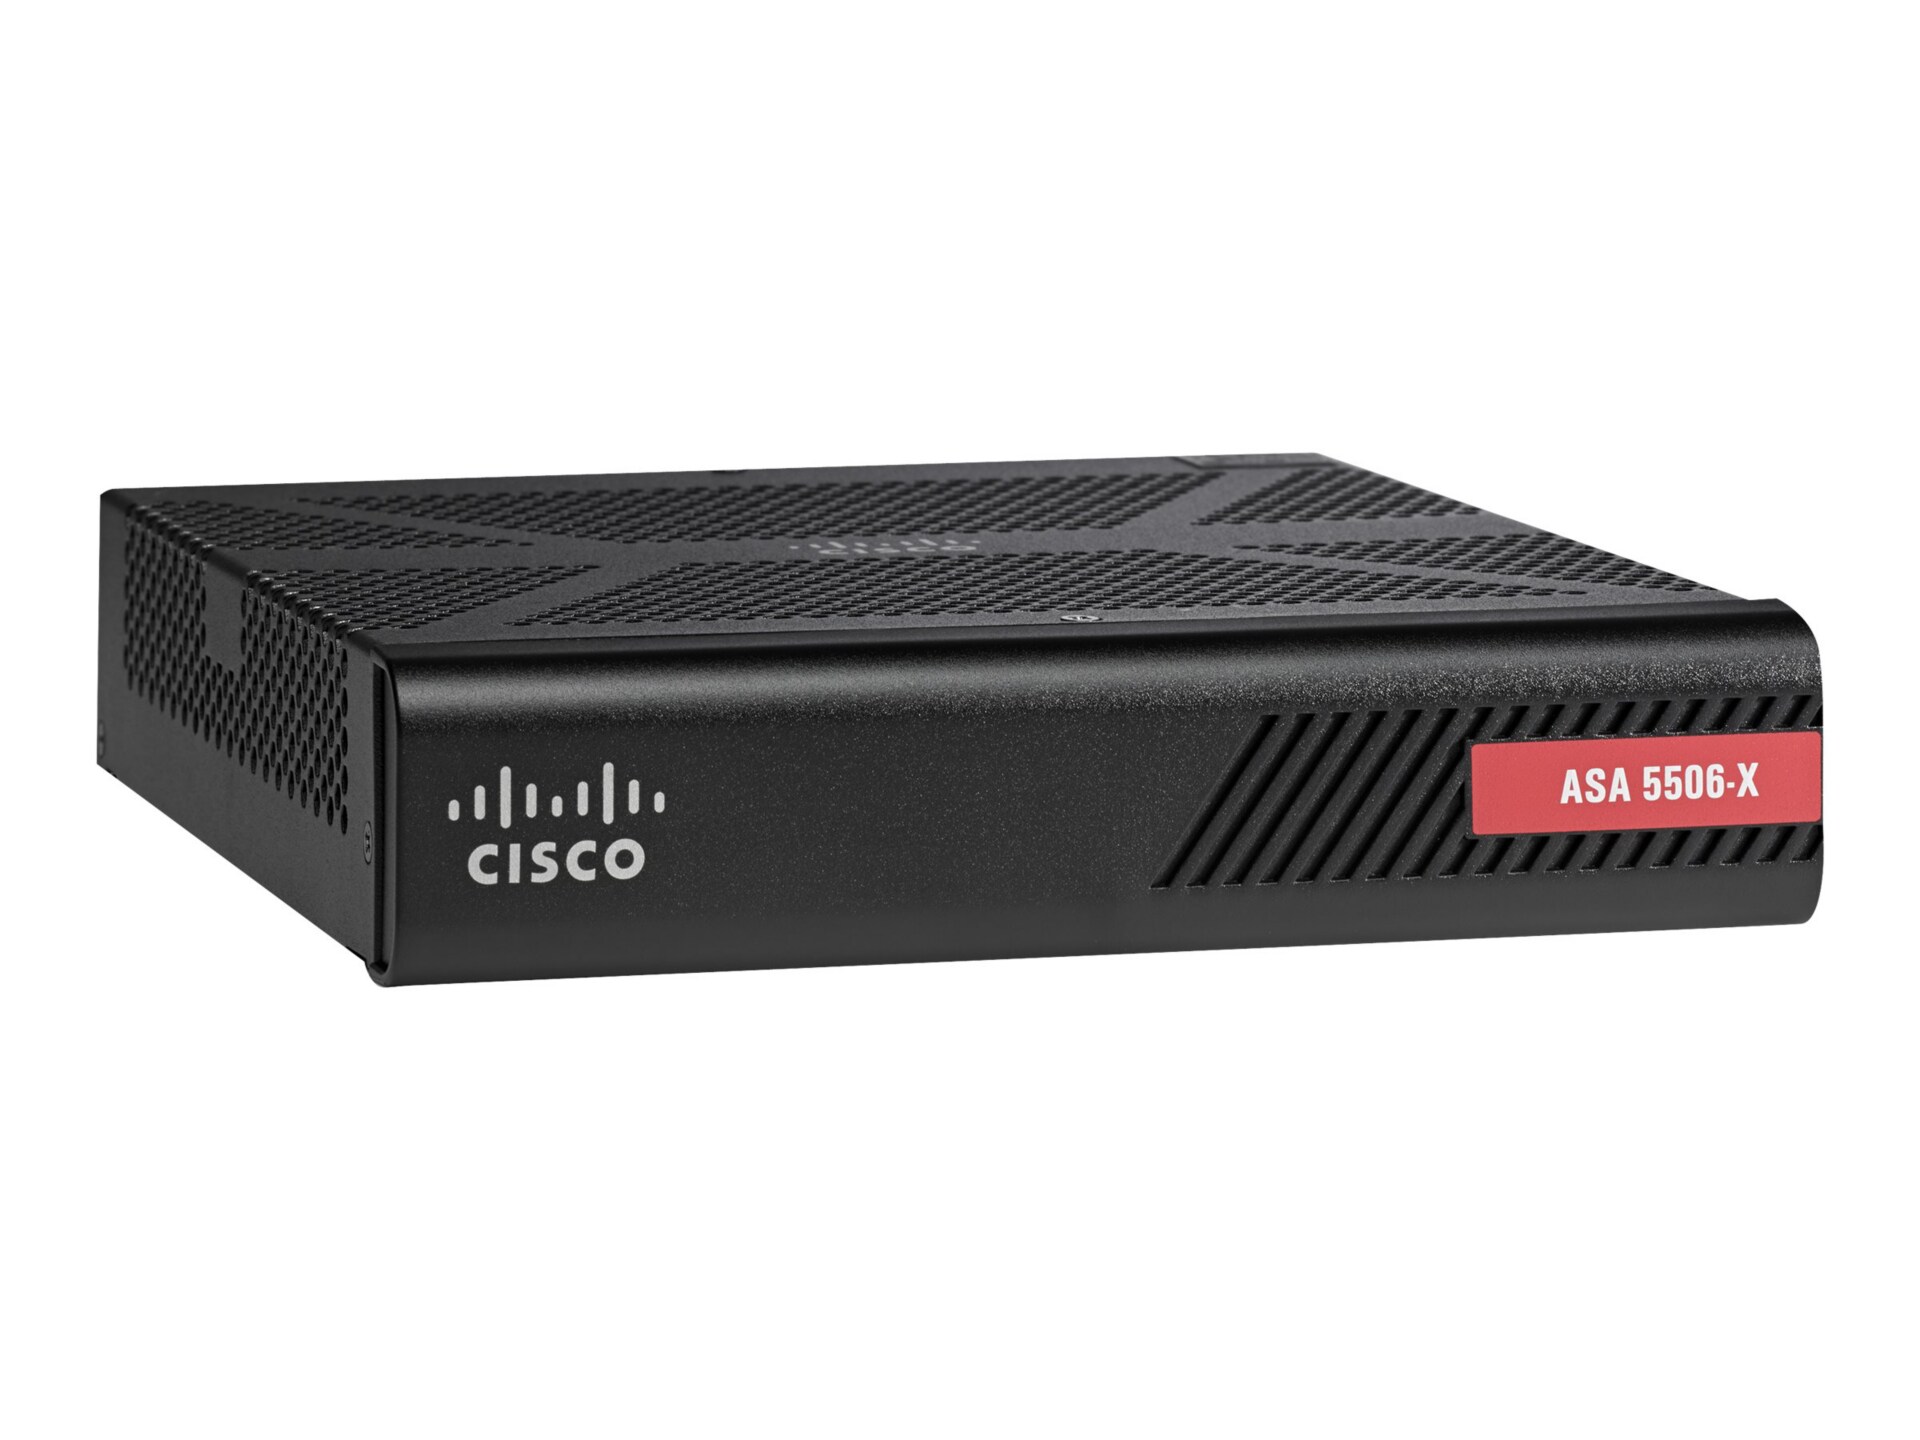 Cisco ASA 5506-X with FirePOWER Services - security appliance - with Cisco Security Plus License